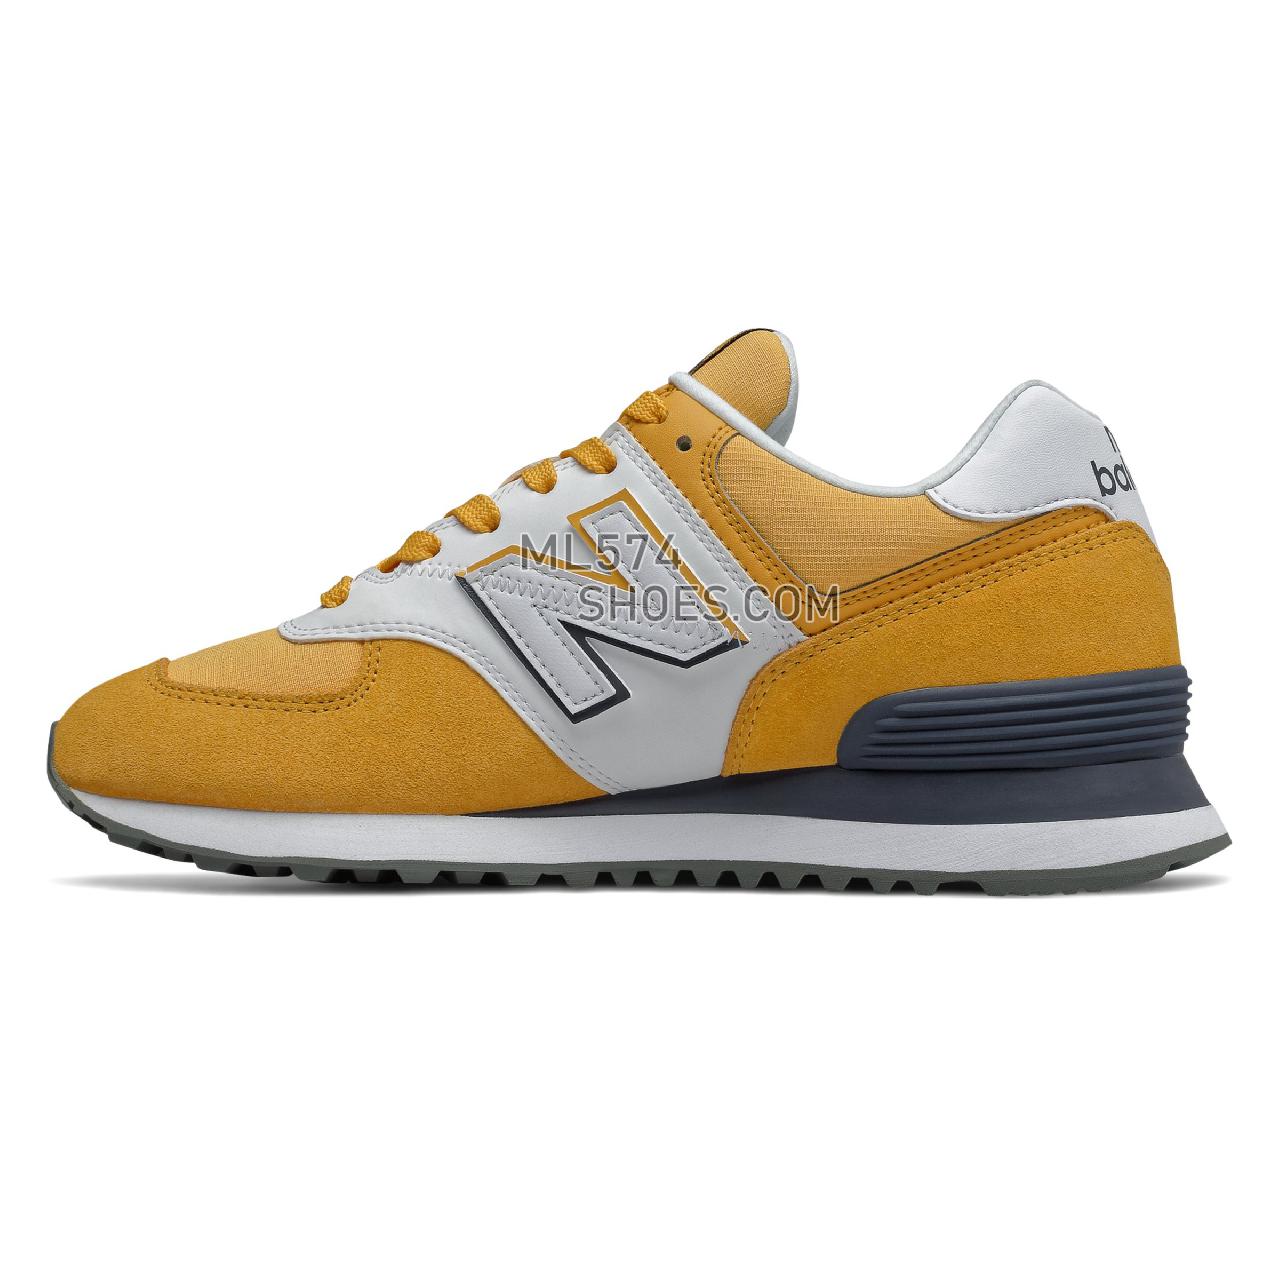 New Balance 574 Split Sail - Women's Classic Sneakers - White with Yellow - WL574NJD